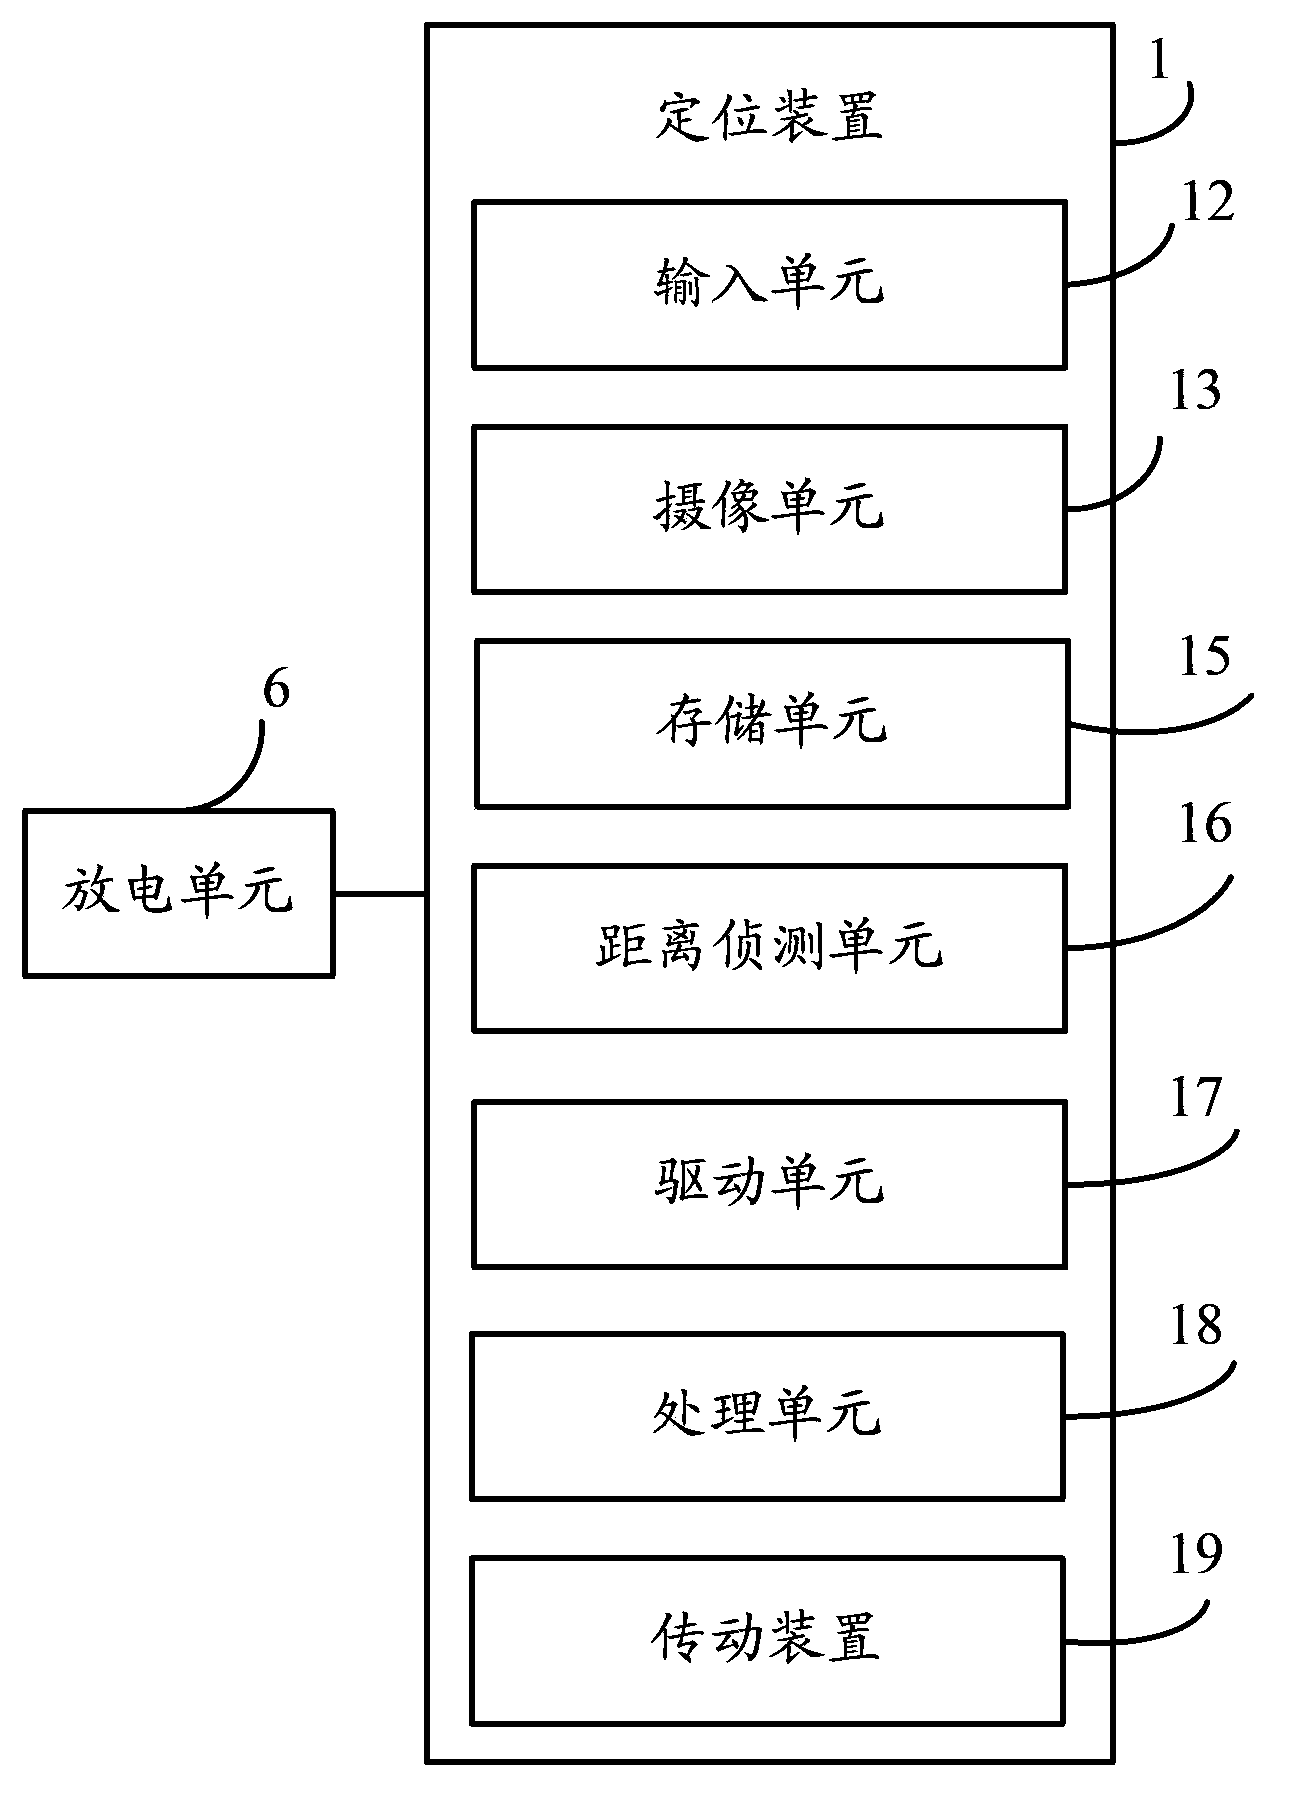 Positioning device and positioning method